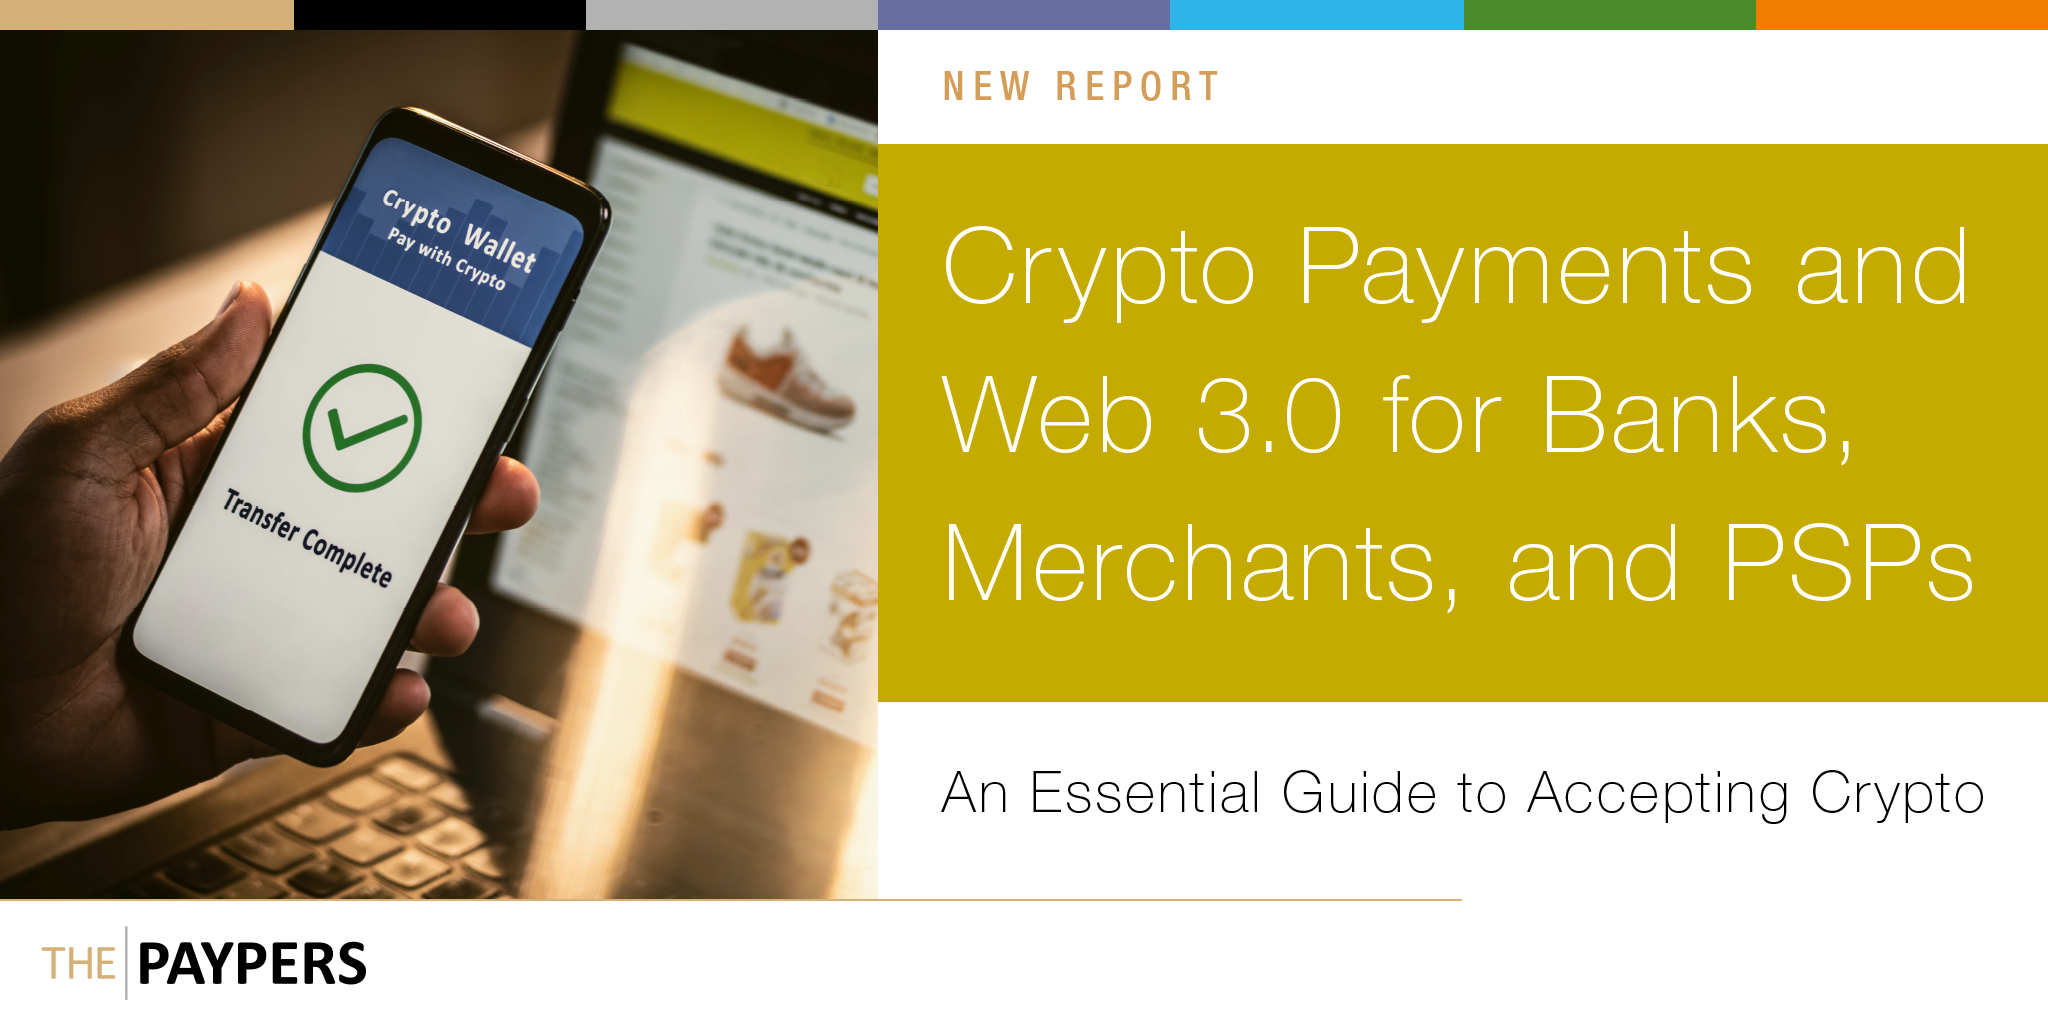 The Paypers has launched Crypto Payments and Web 3.0 For Banks, Merchants, and PSPs, an essential guide to accepting crypto payments and the cash management around it.